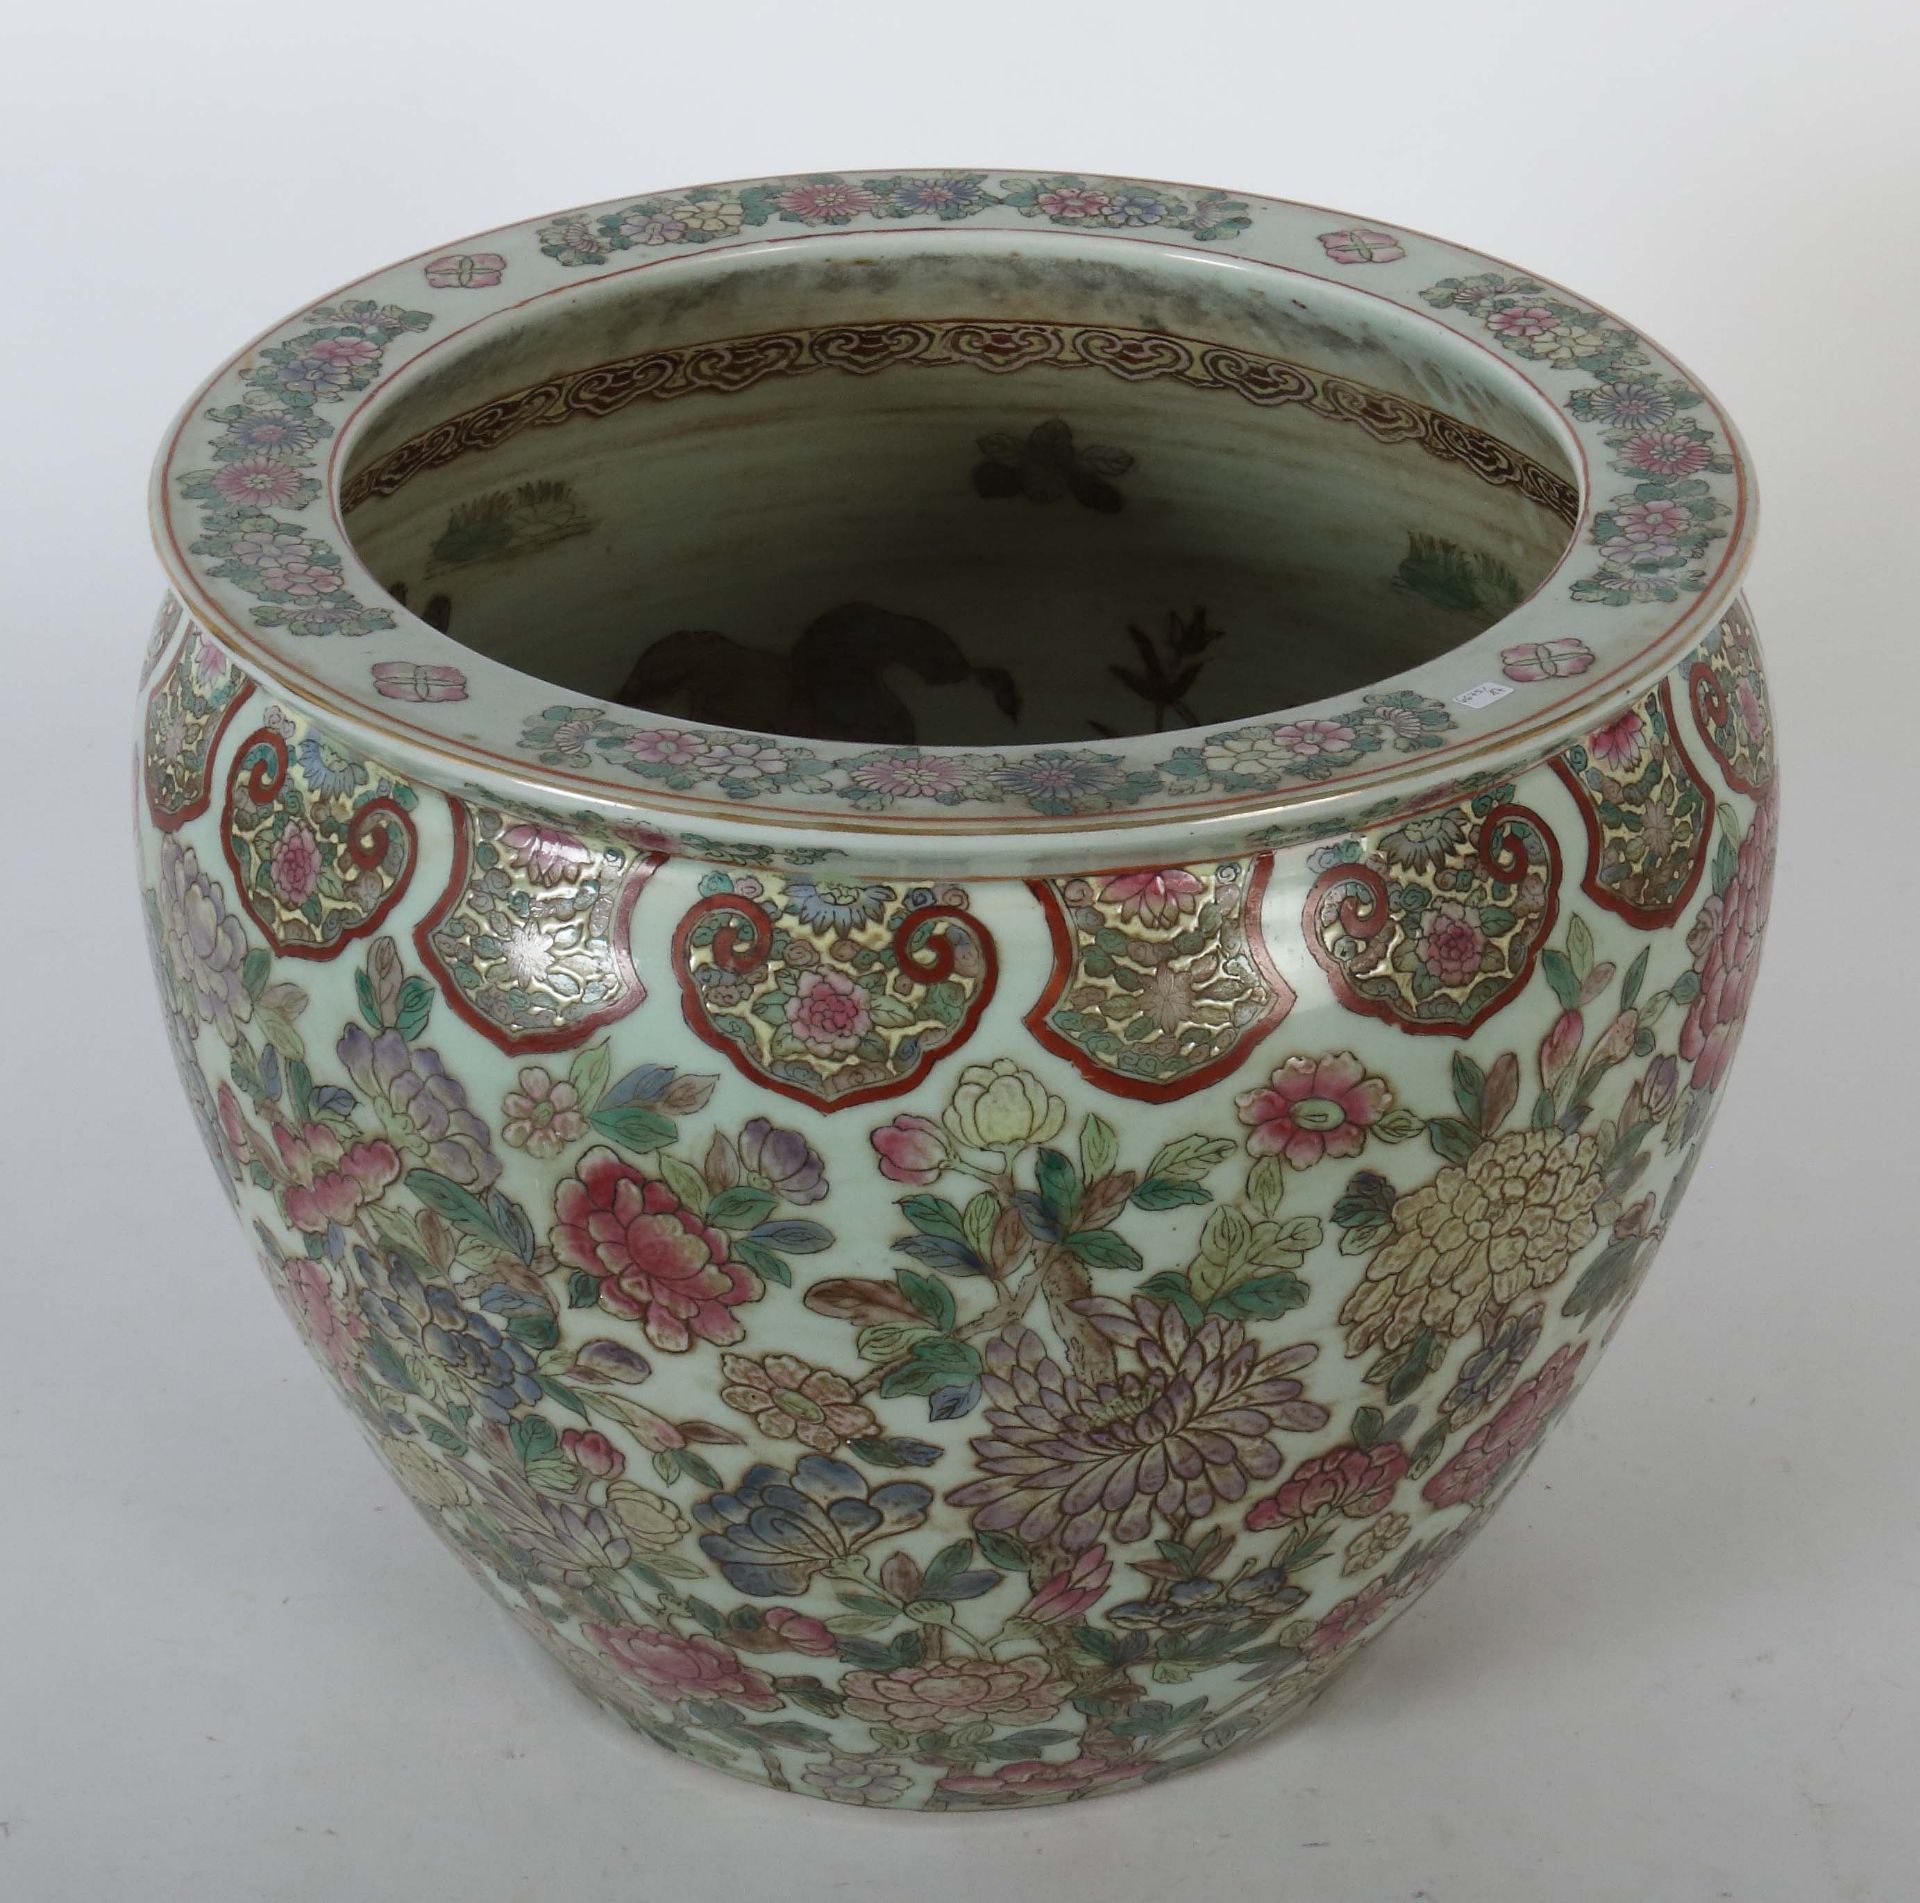 Großer Cachepot China, wohl 19. Jh., - Image 2 of 5